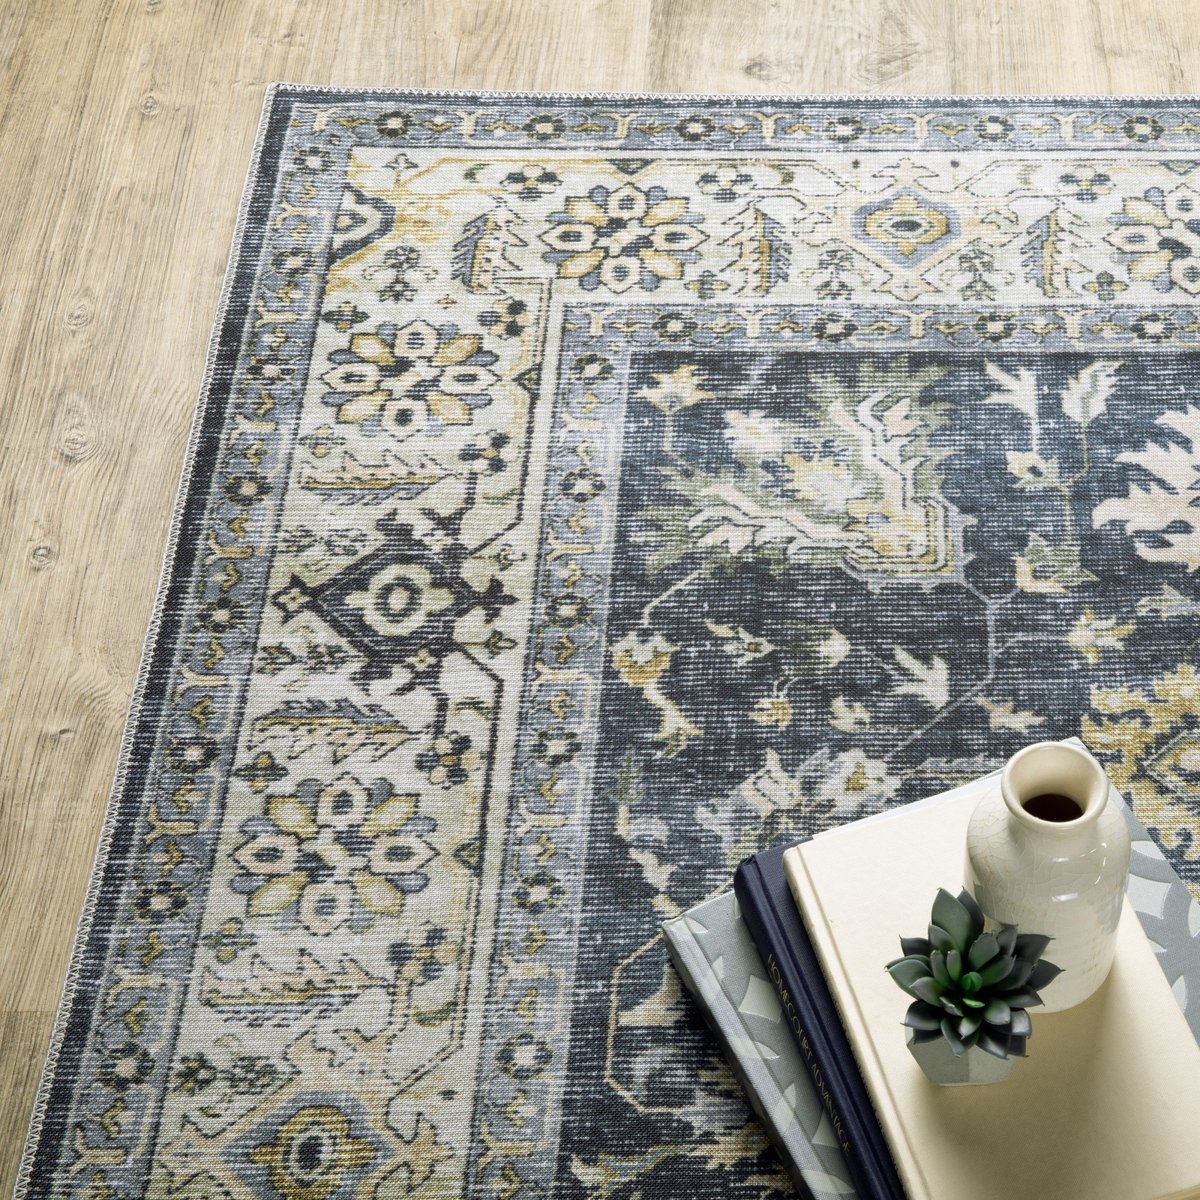 Rug Size Guide - Rugs Direct Help and Advice Centre